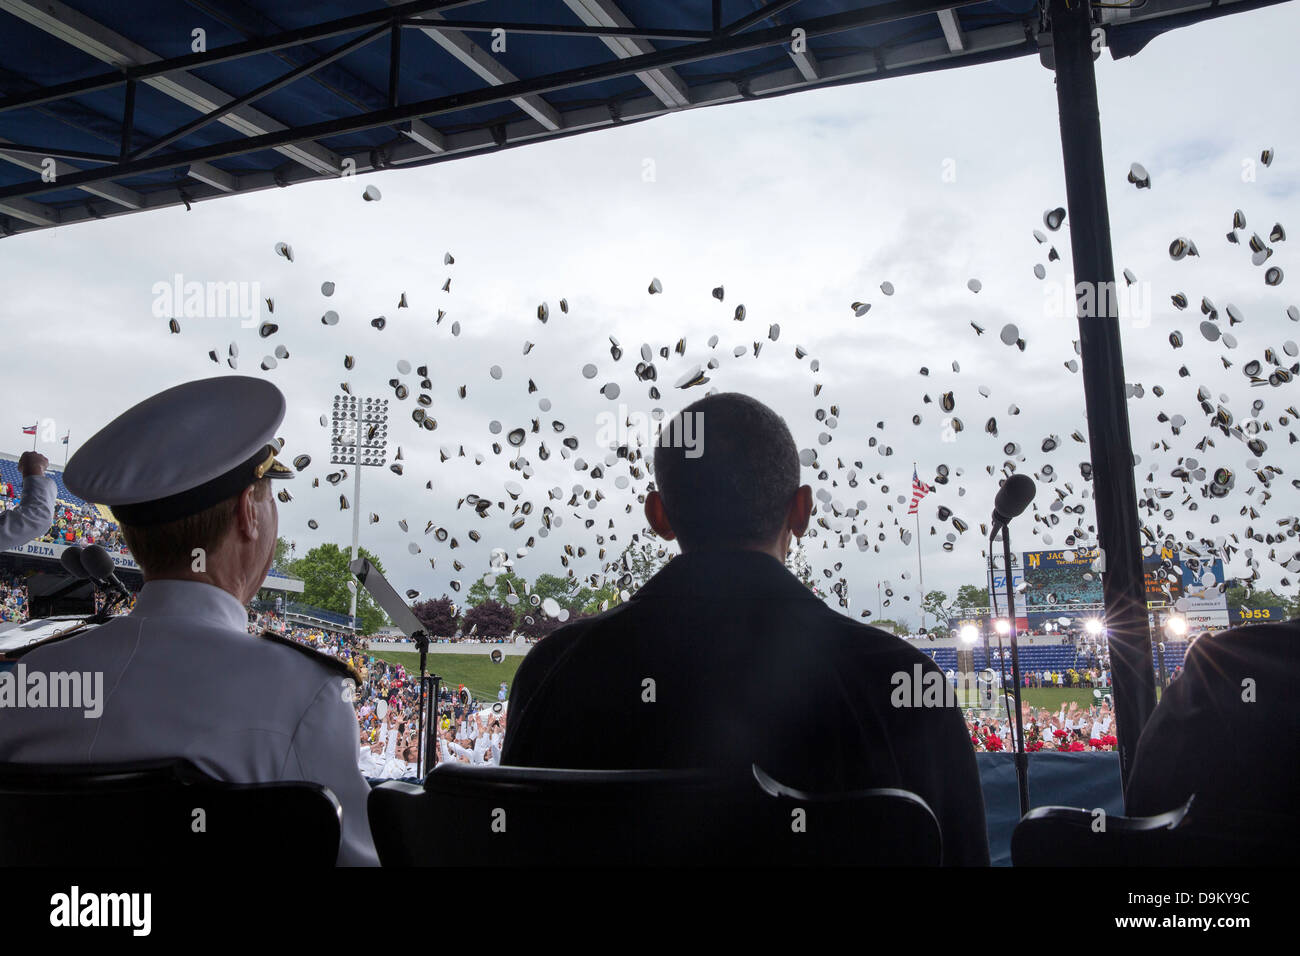 US President Barack Obama watches as graduates toss their hats at the conclusion of the US Naval Academy commencement at the Navy-Marine Corps Memorial Stadium May 24, 2013 in Annapolis, MD. Stock Photo